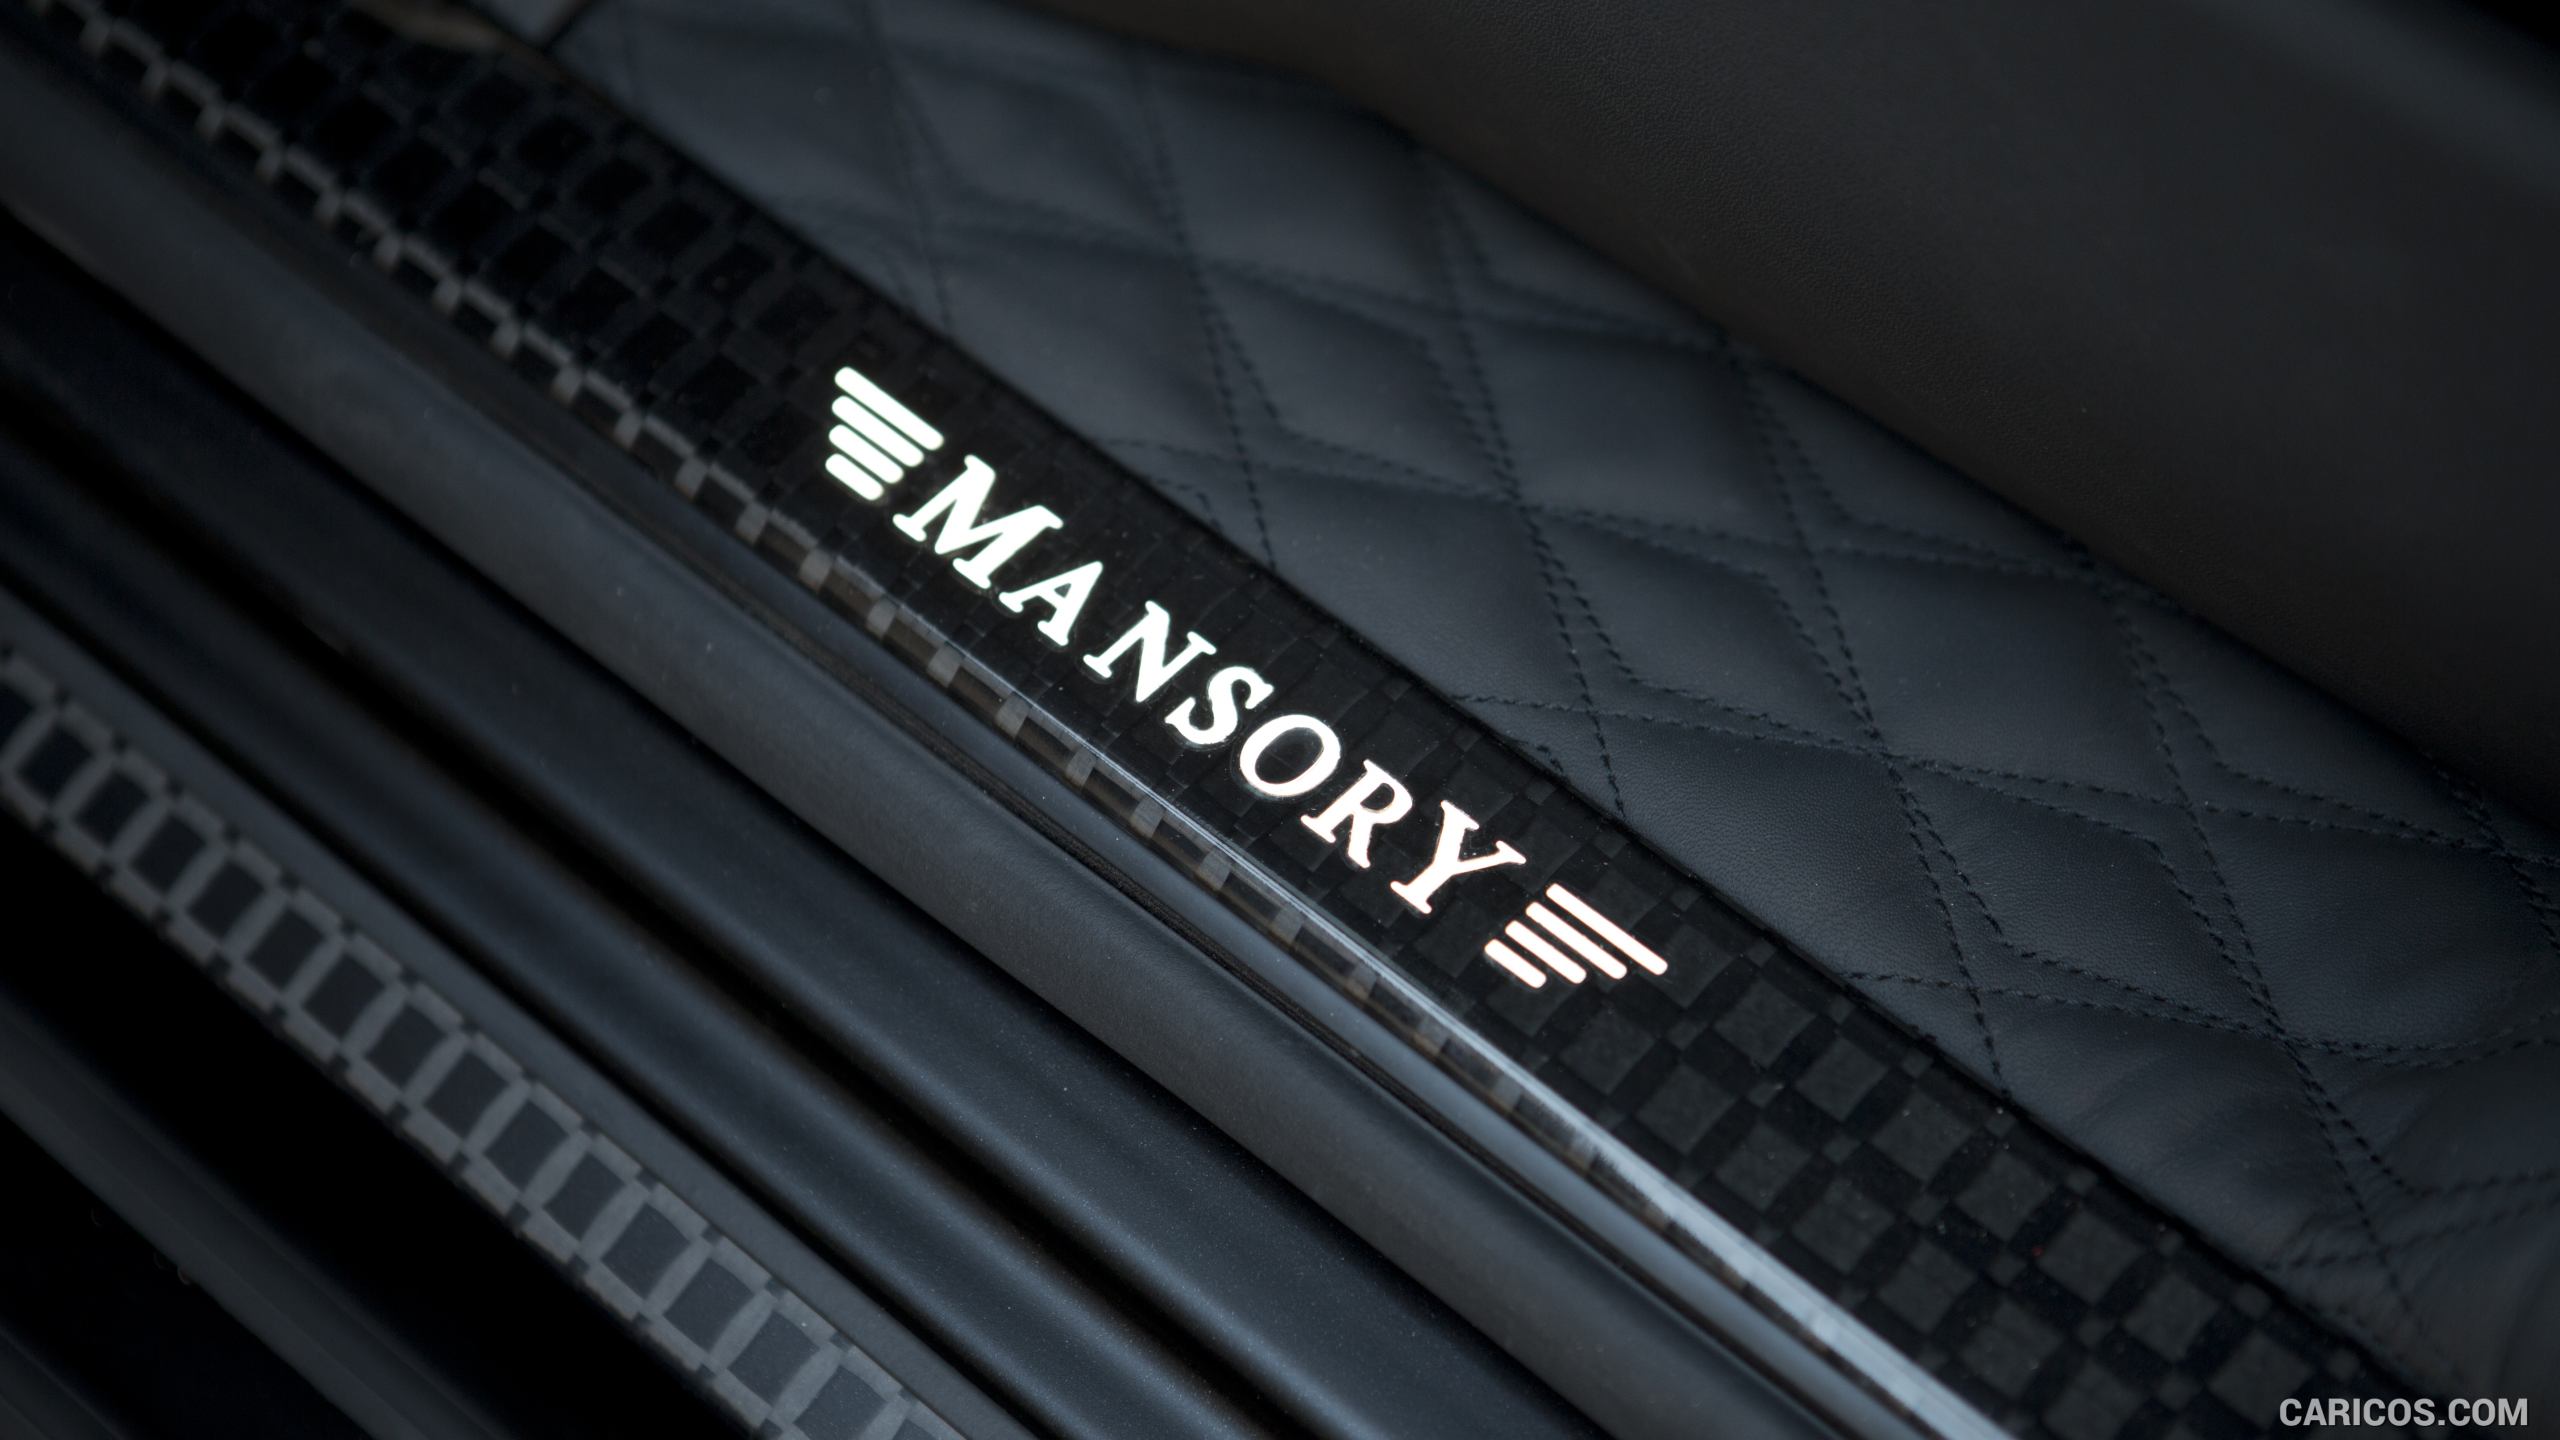 2016 MANSORY GRONOS Black Edition based on Mercedes G63 AMG - Door Sill, #10 of 16